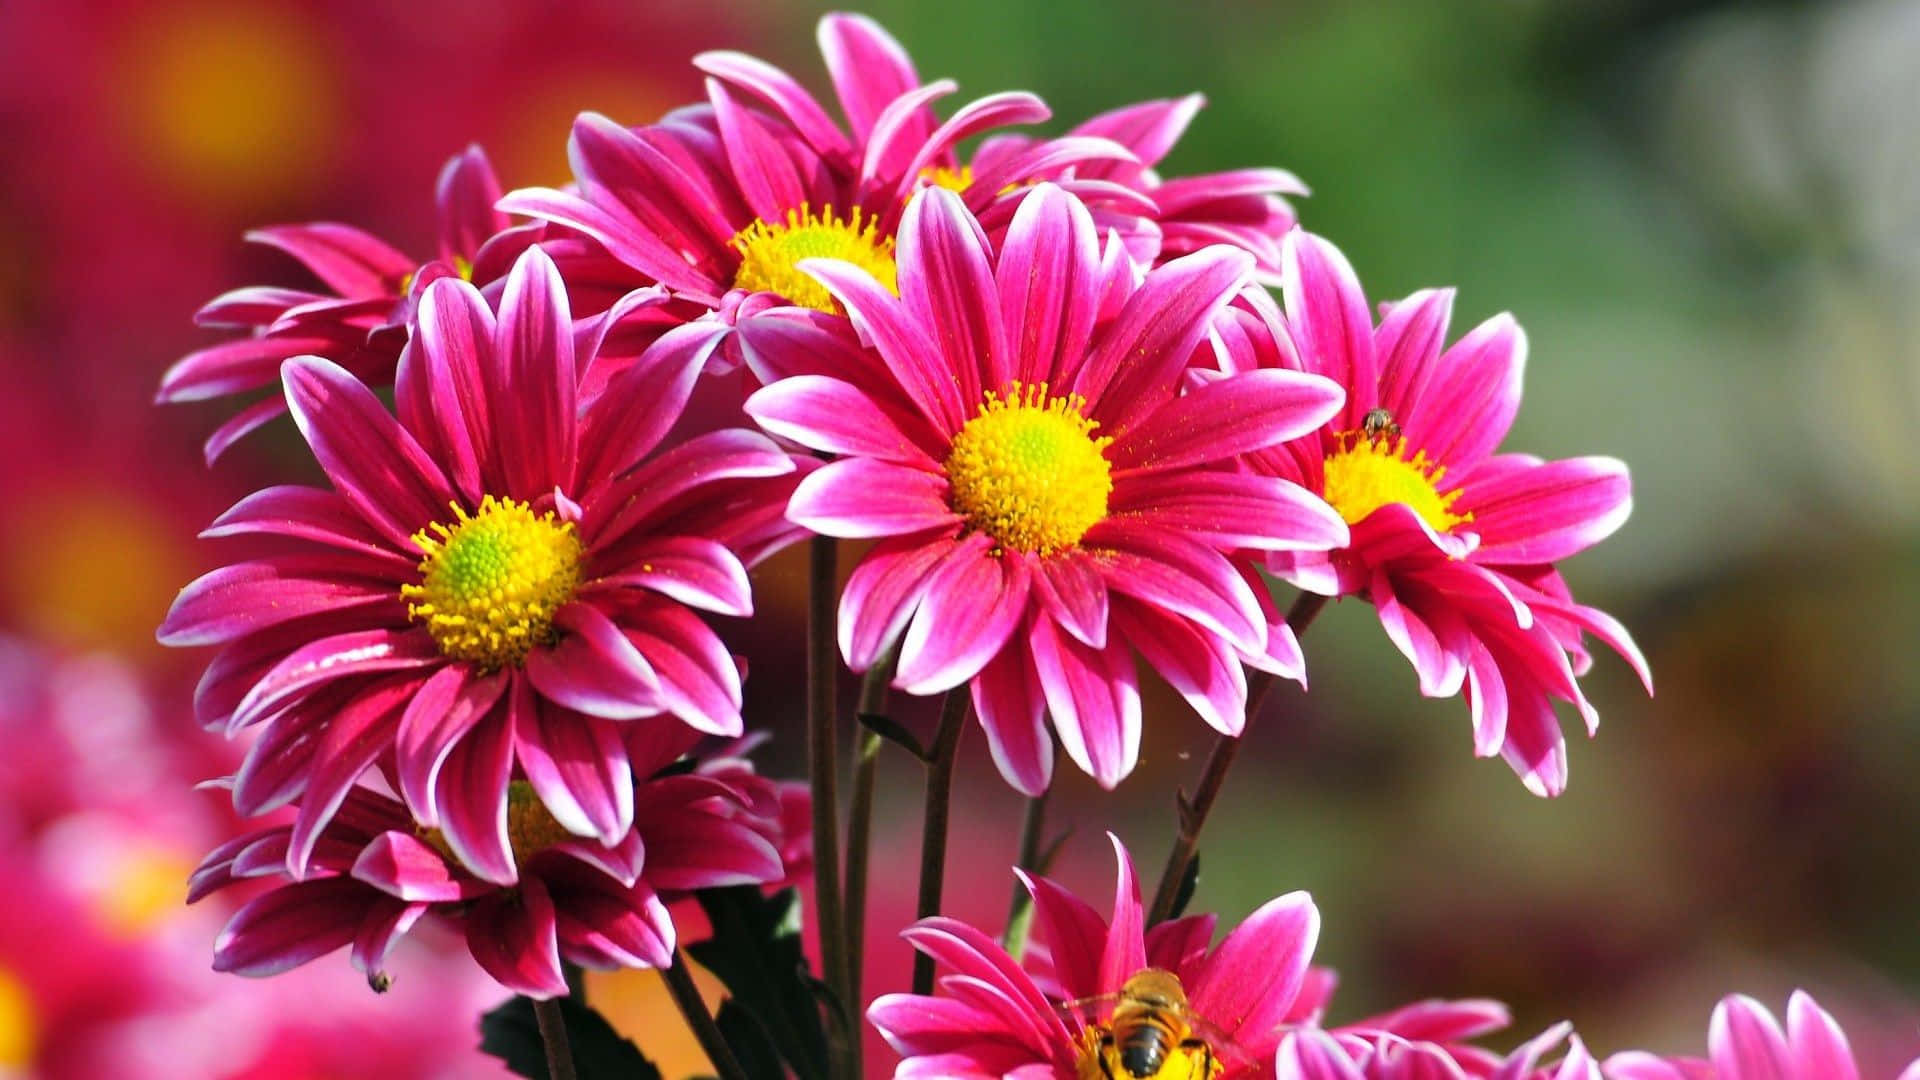 Summer Perennial Beautiful Flowers Pictures 1920 x 1080 Picture